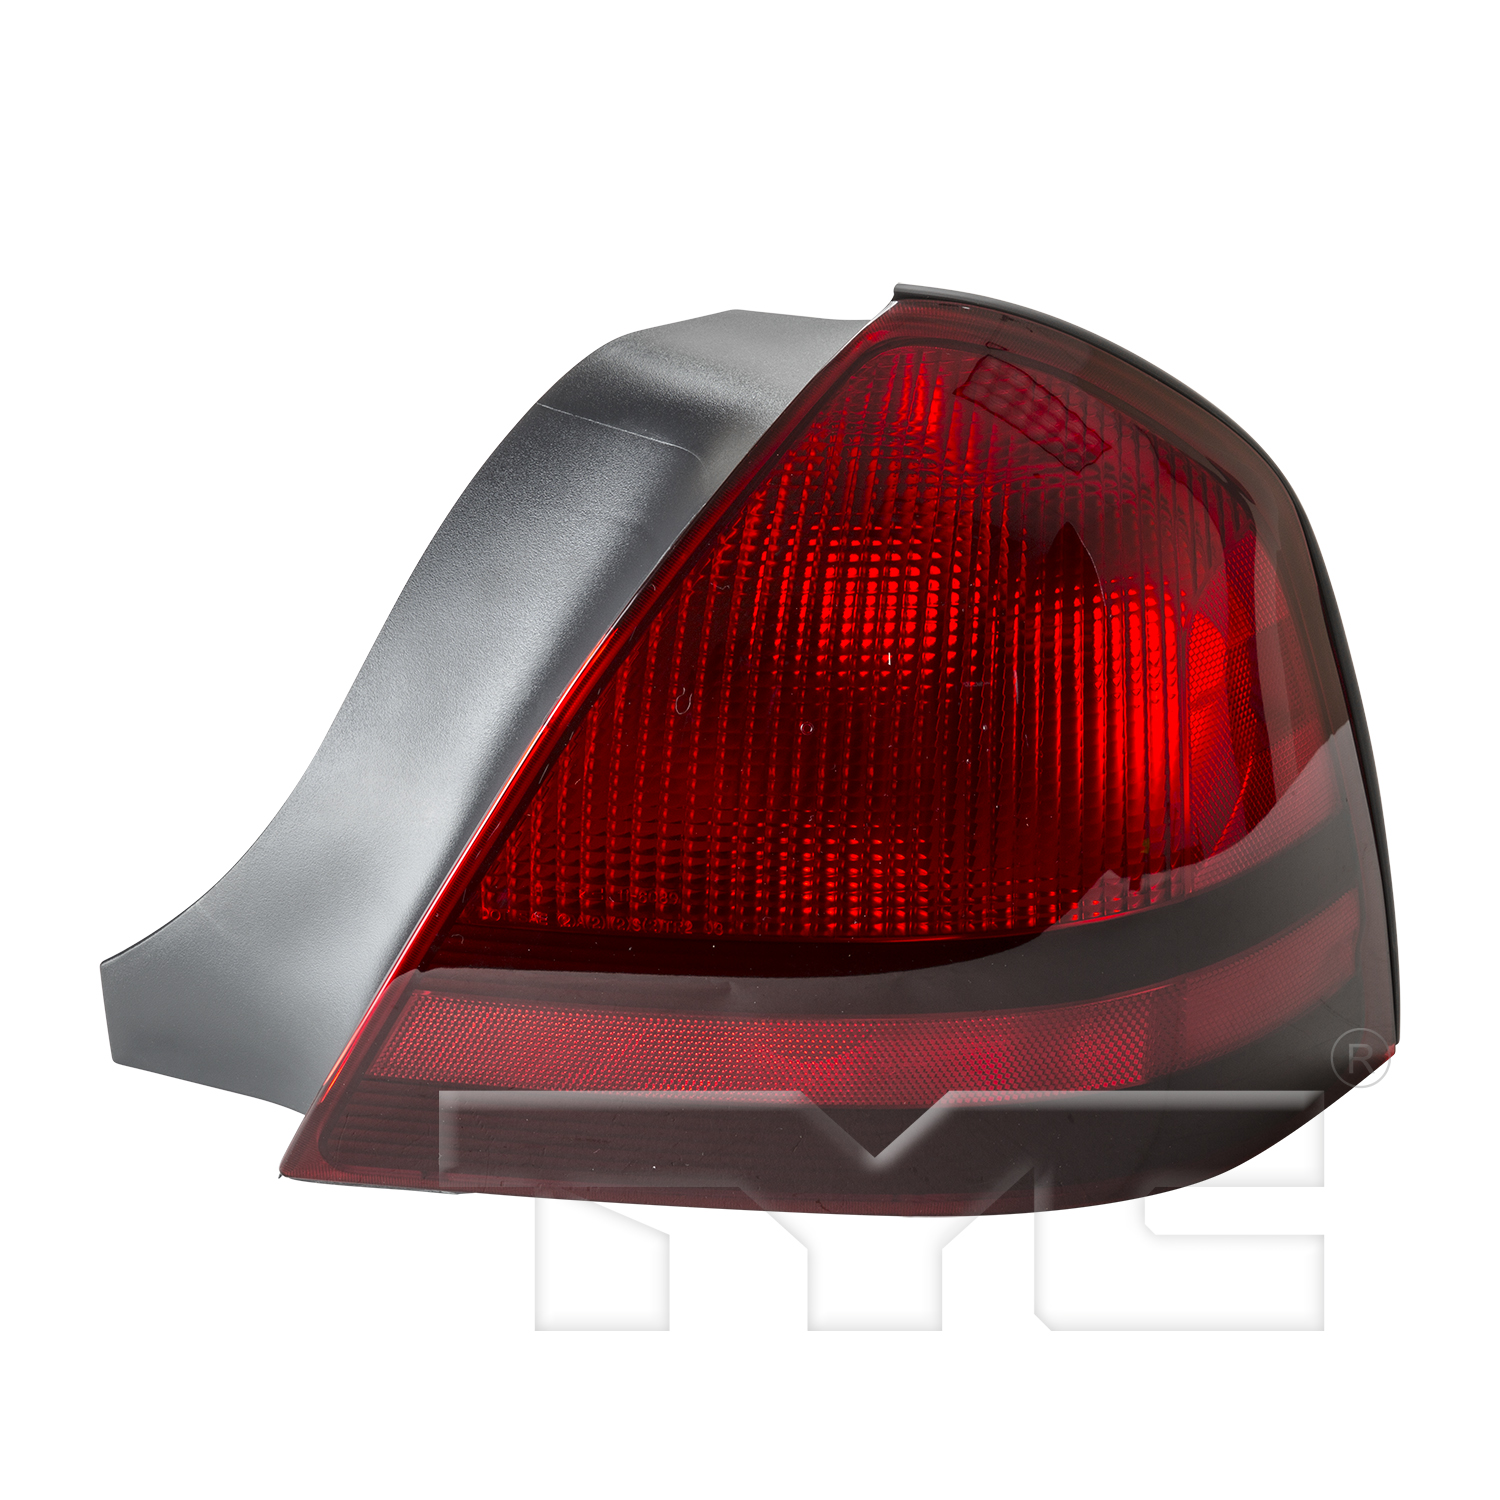 Aftermarket TAILLIGHTS for MERCURY - GRAND MARQUIS, GRAND MARQUIS,03-11,RT Taillamp assy